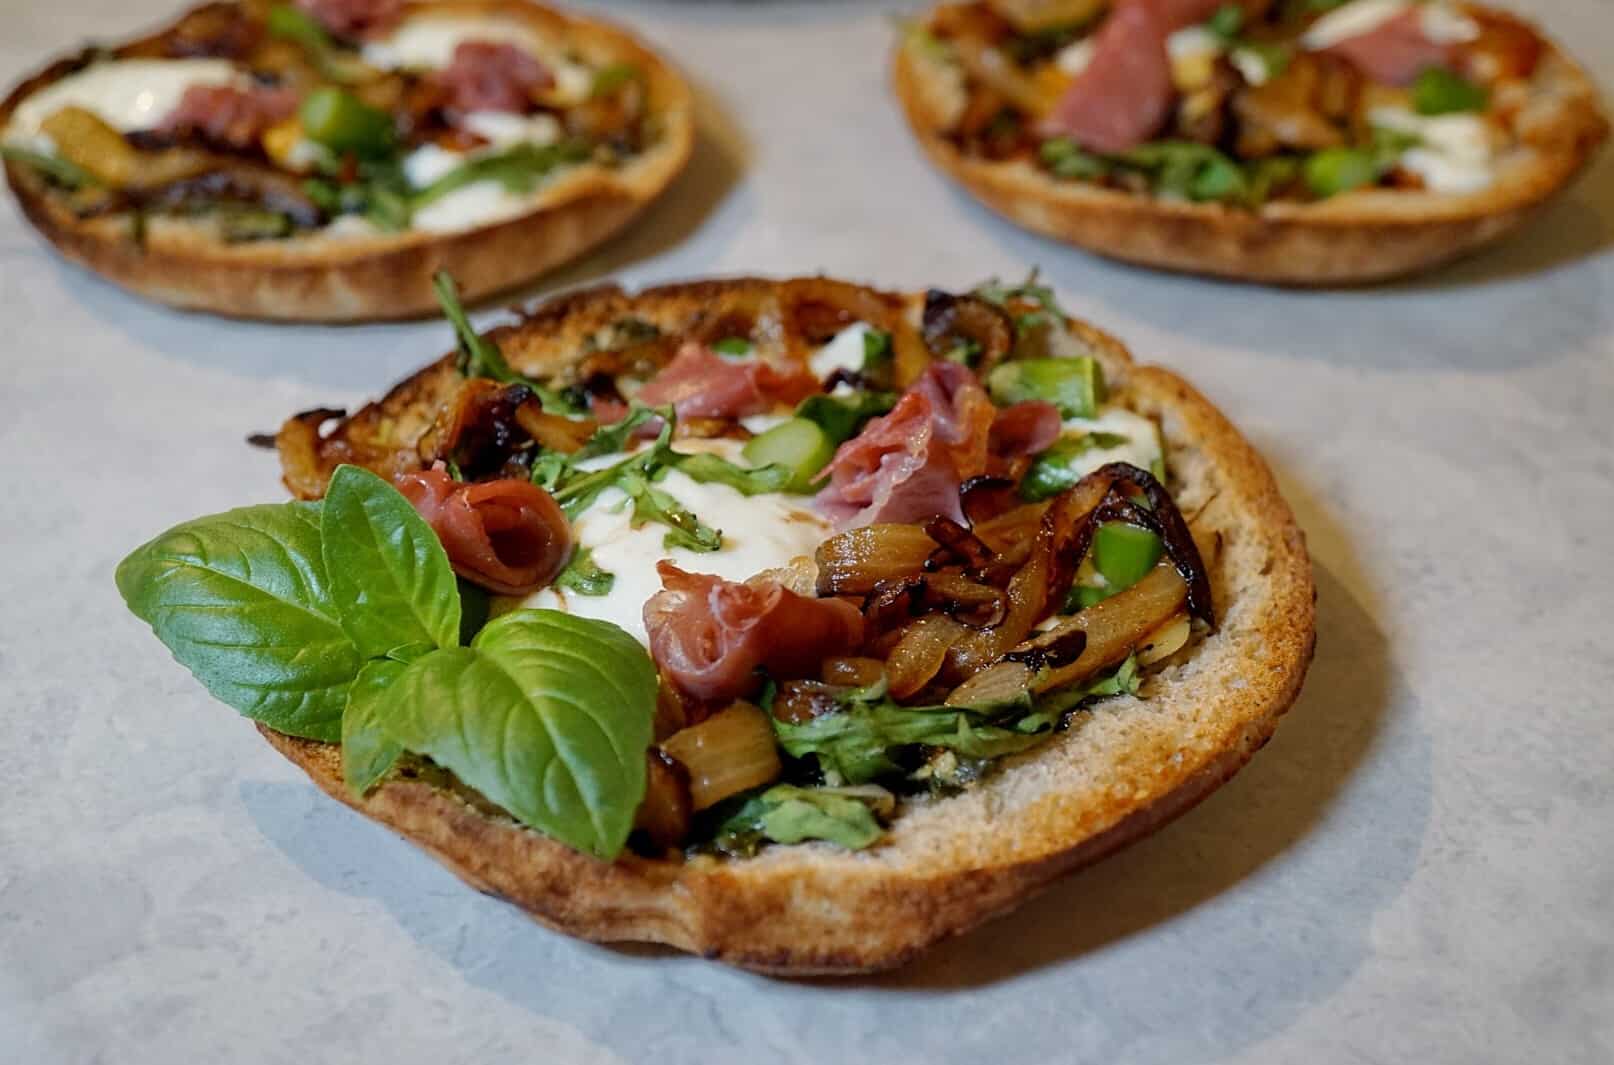 These easy Burrata Pesto Pizzas are the perfect appetizer or even filling enough for a small meal. They're made with Filippo Berio Pesto, prosciutto, burrata cheese, caramelized onions, arugula, and asparagus. These pizzas may be mini, but each bite is like a flavor explosion in your mouth!